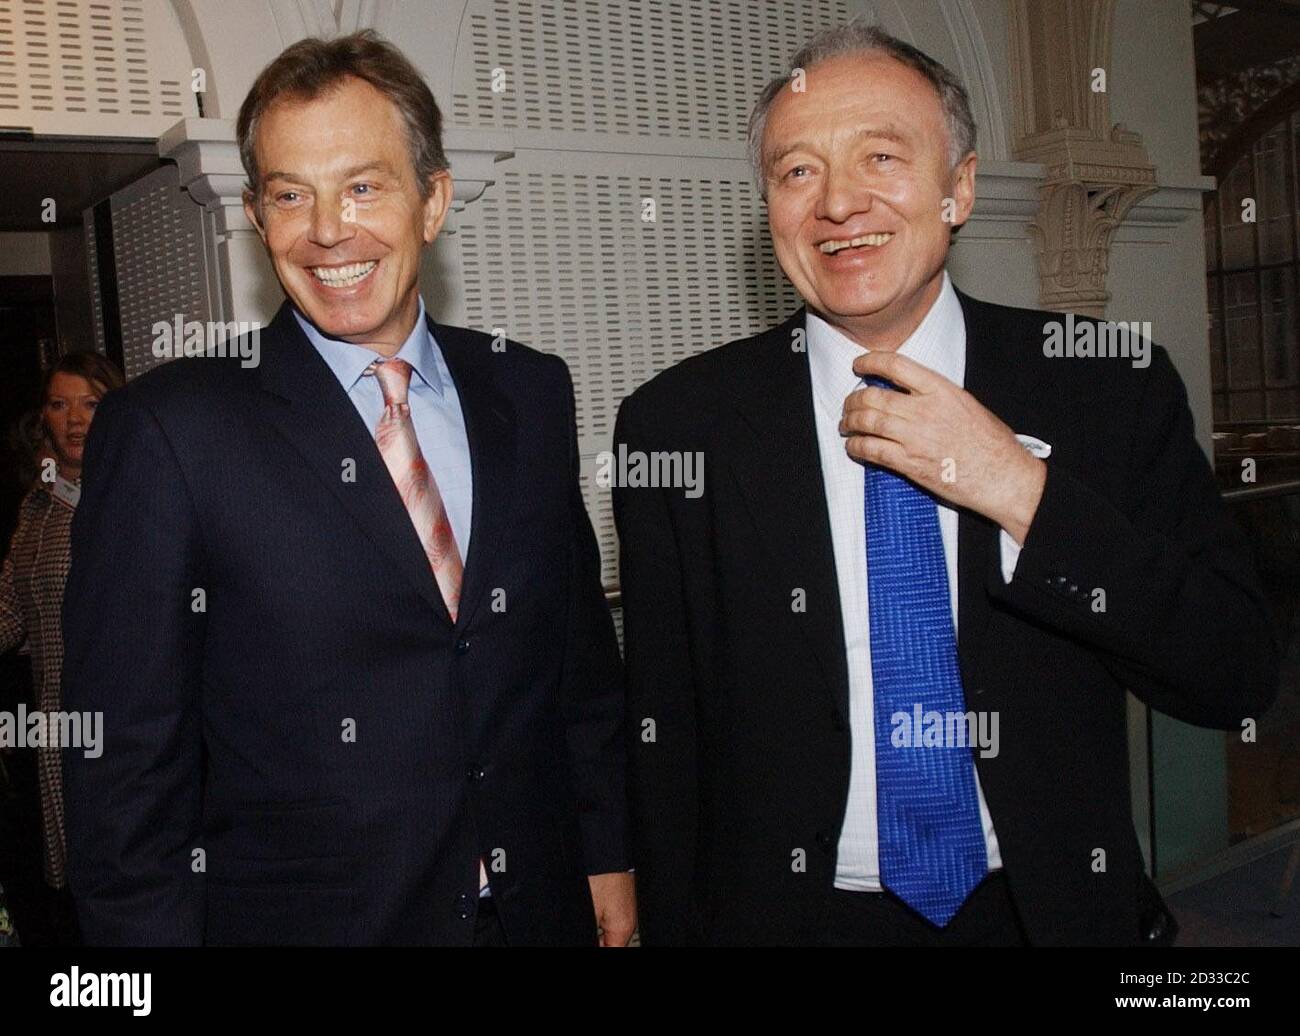 Prime Minister Tony Blair (L) stood alongside Mayor for London Ken Livingstone at the launch of London's bid for the 2012 Olympics held at the Royal Opera House in London. Stock Photo